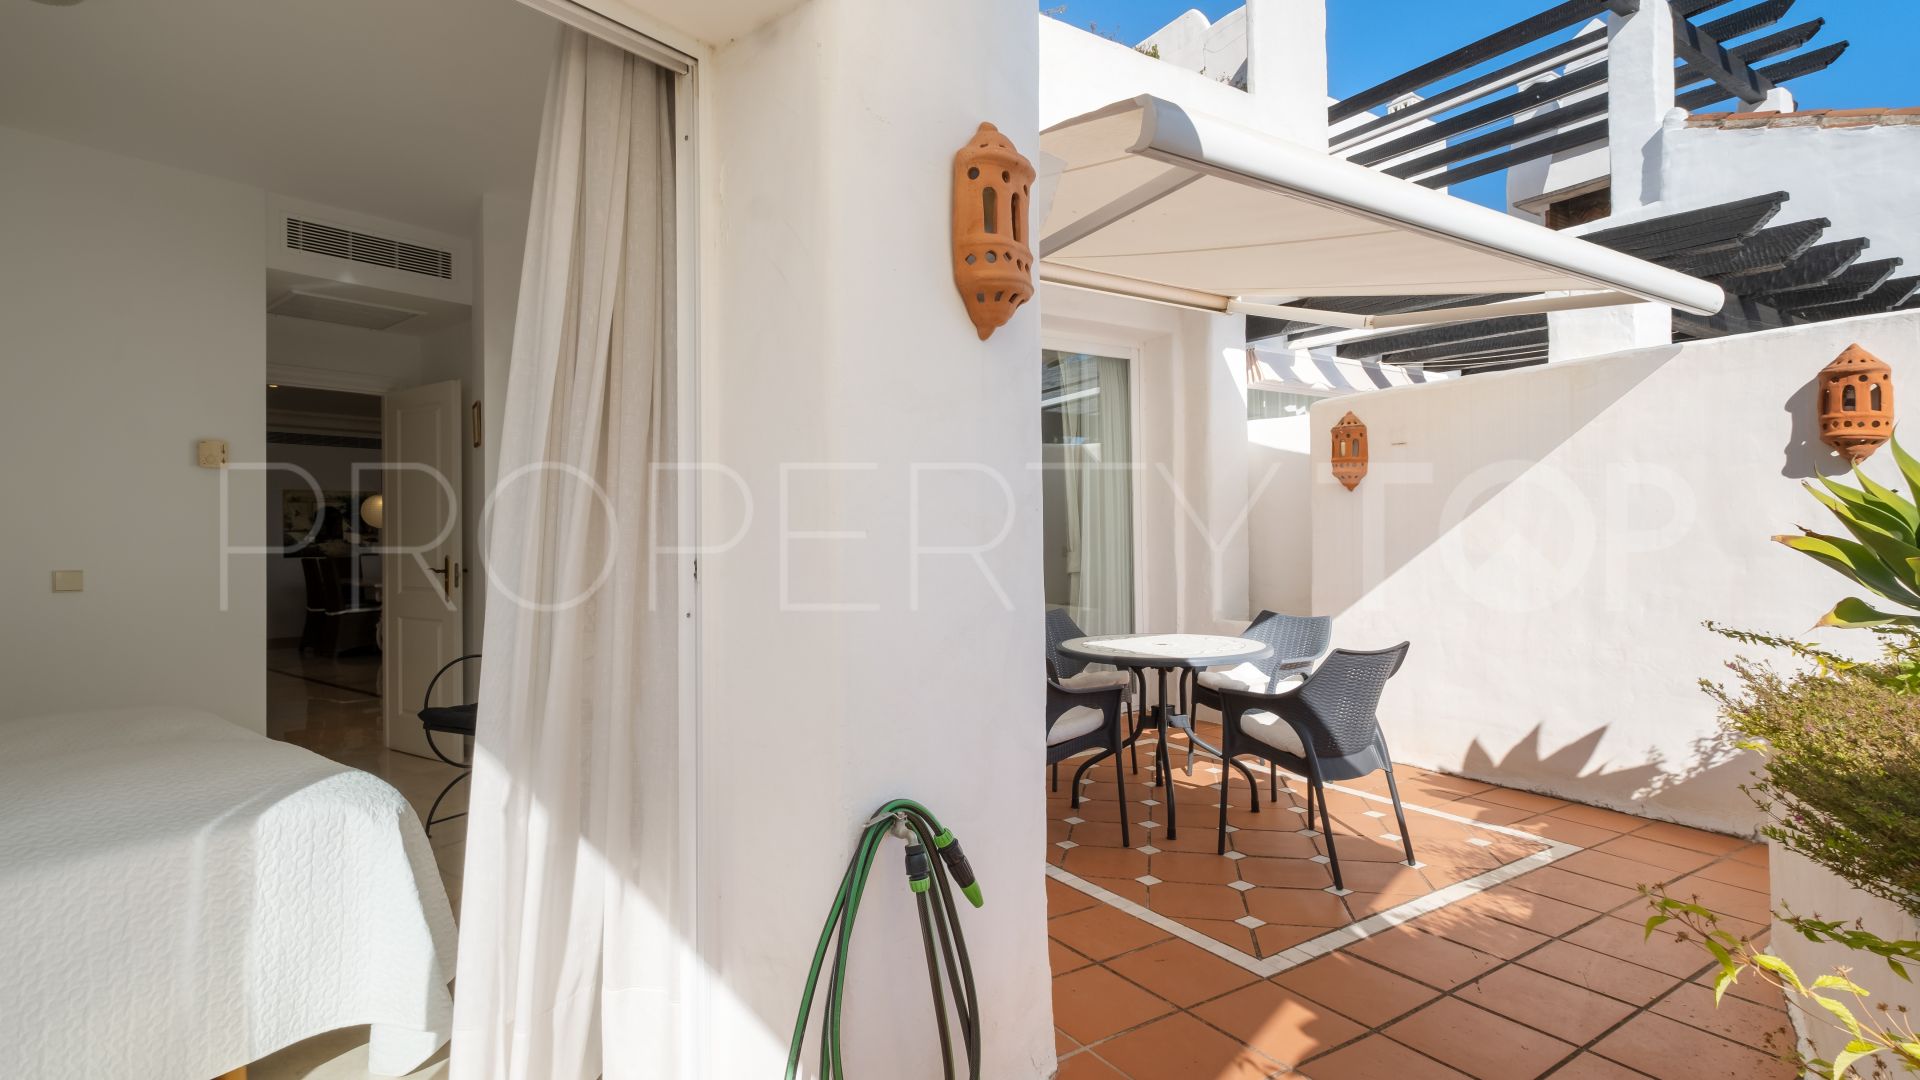 For sale duplex penthouse in Marbella - Puerto Banus with 3 bedrooms